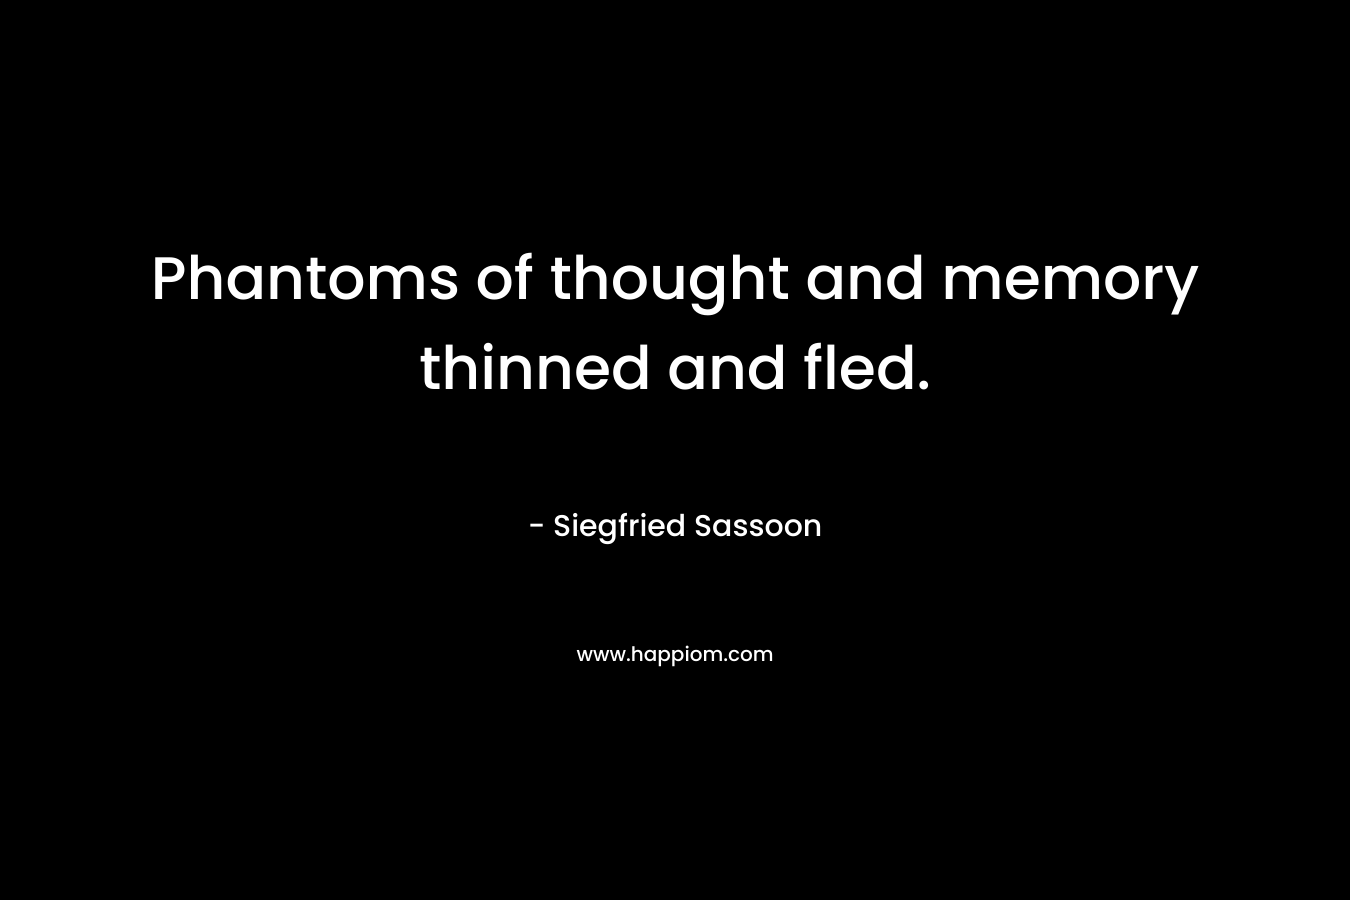 Phantoms of thought and memory thinned and fled. – Siegfried Sassoon